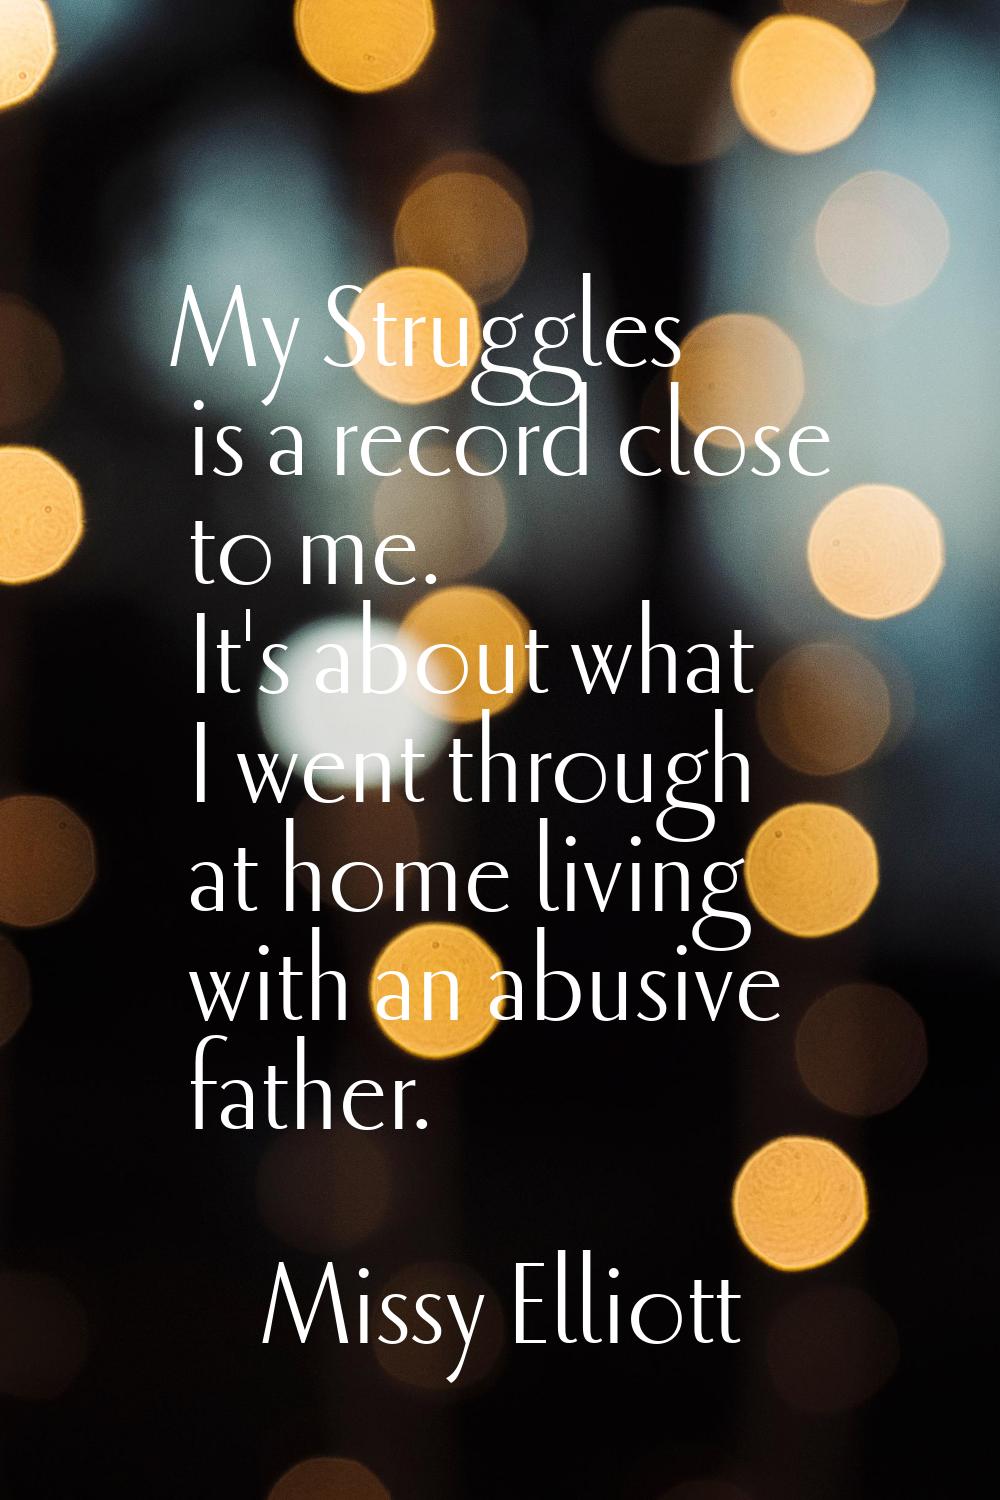 My Struggles is a record close to me. It's about what I went through at home living with an abusive